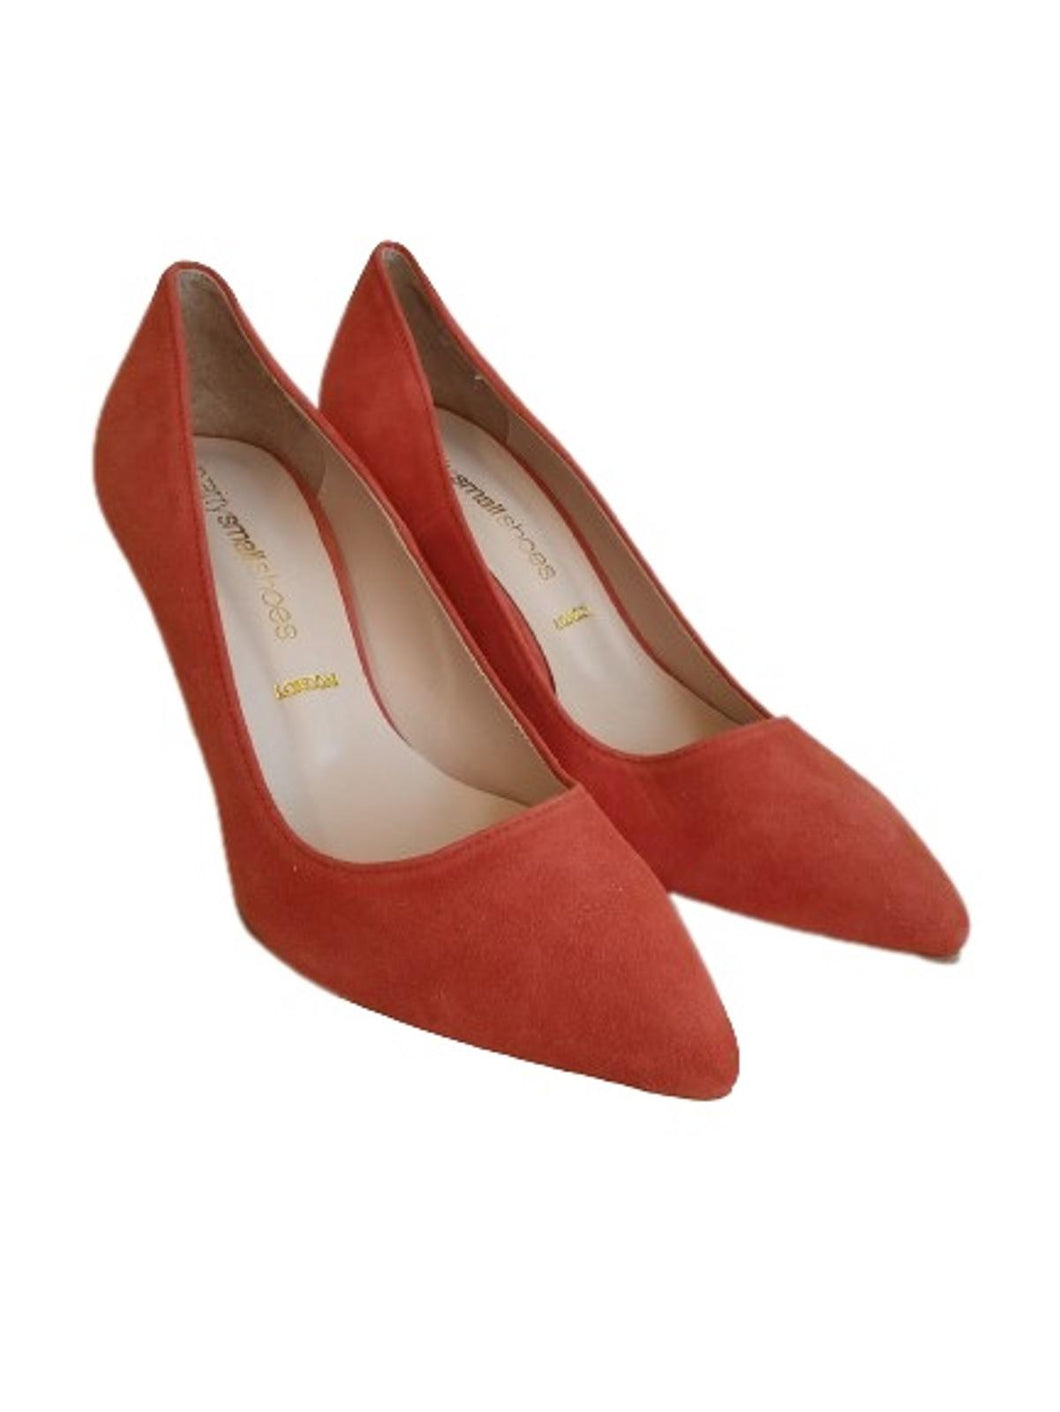 PRETTY SMALL SHOES Ladies Red Suede Pointed Toe Pump Shoes Size EU35 UK2